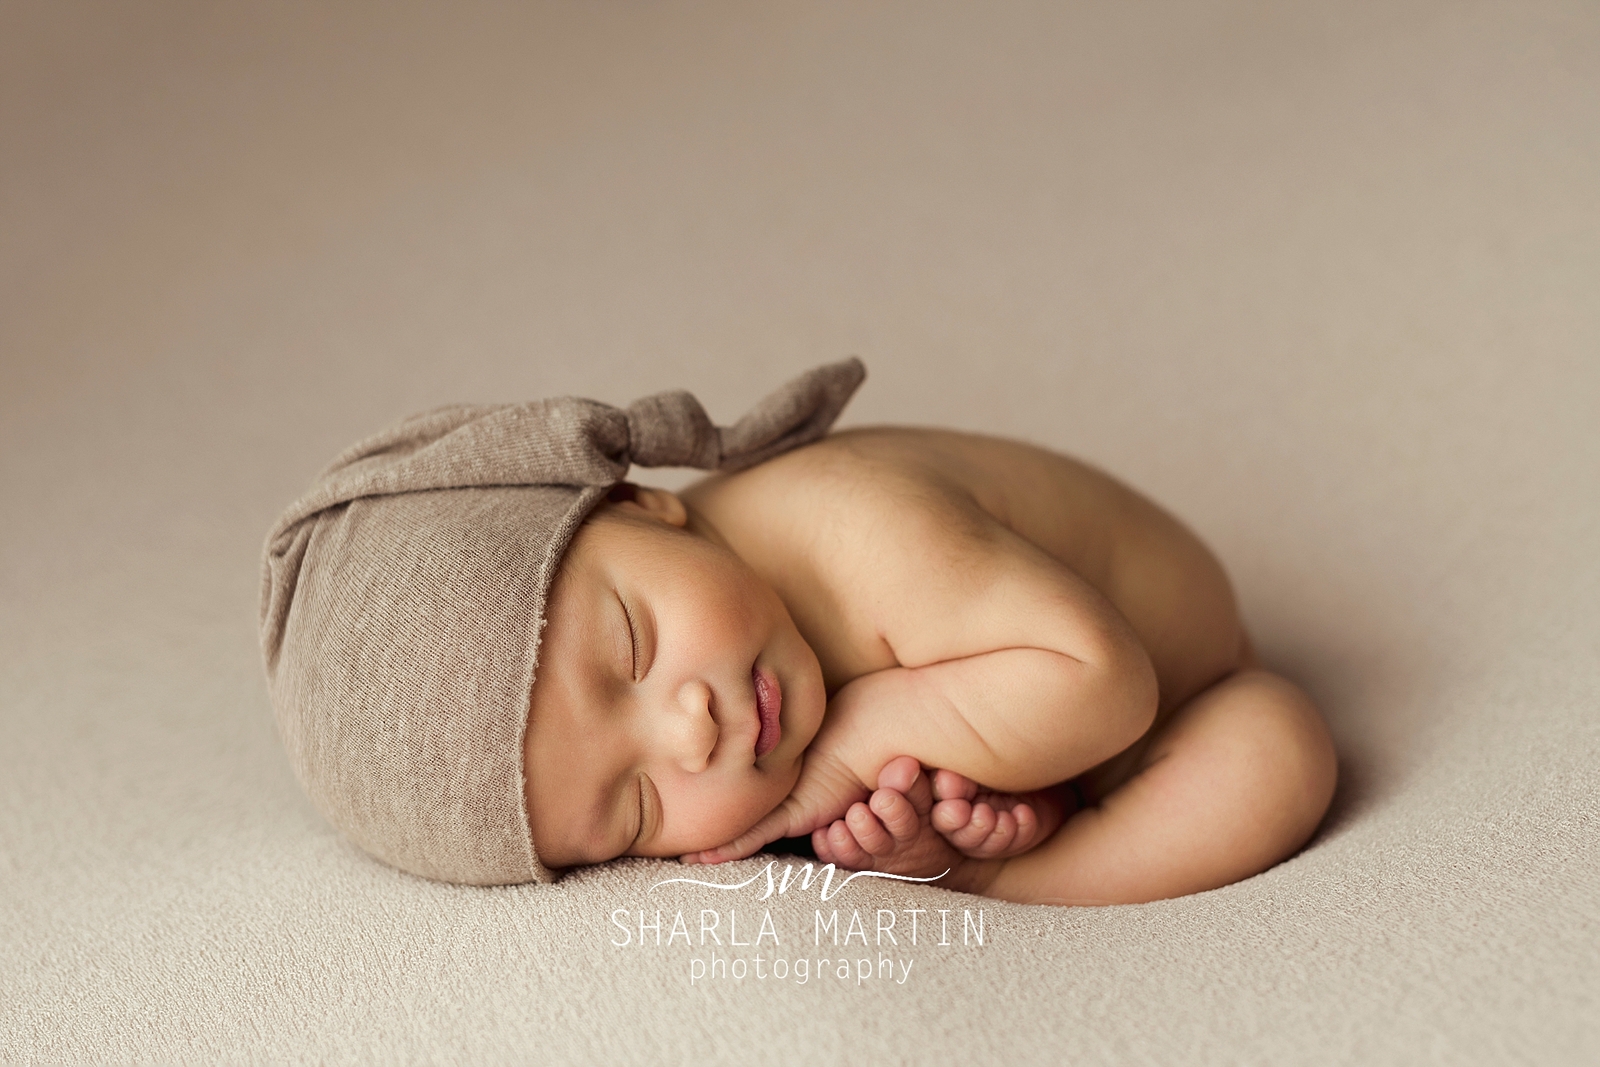 Newborn Photos with Parents | 7 Poses to Try!